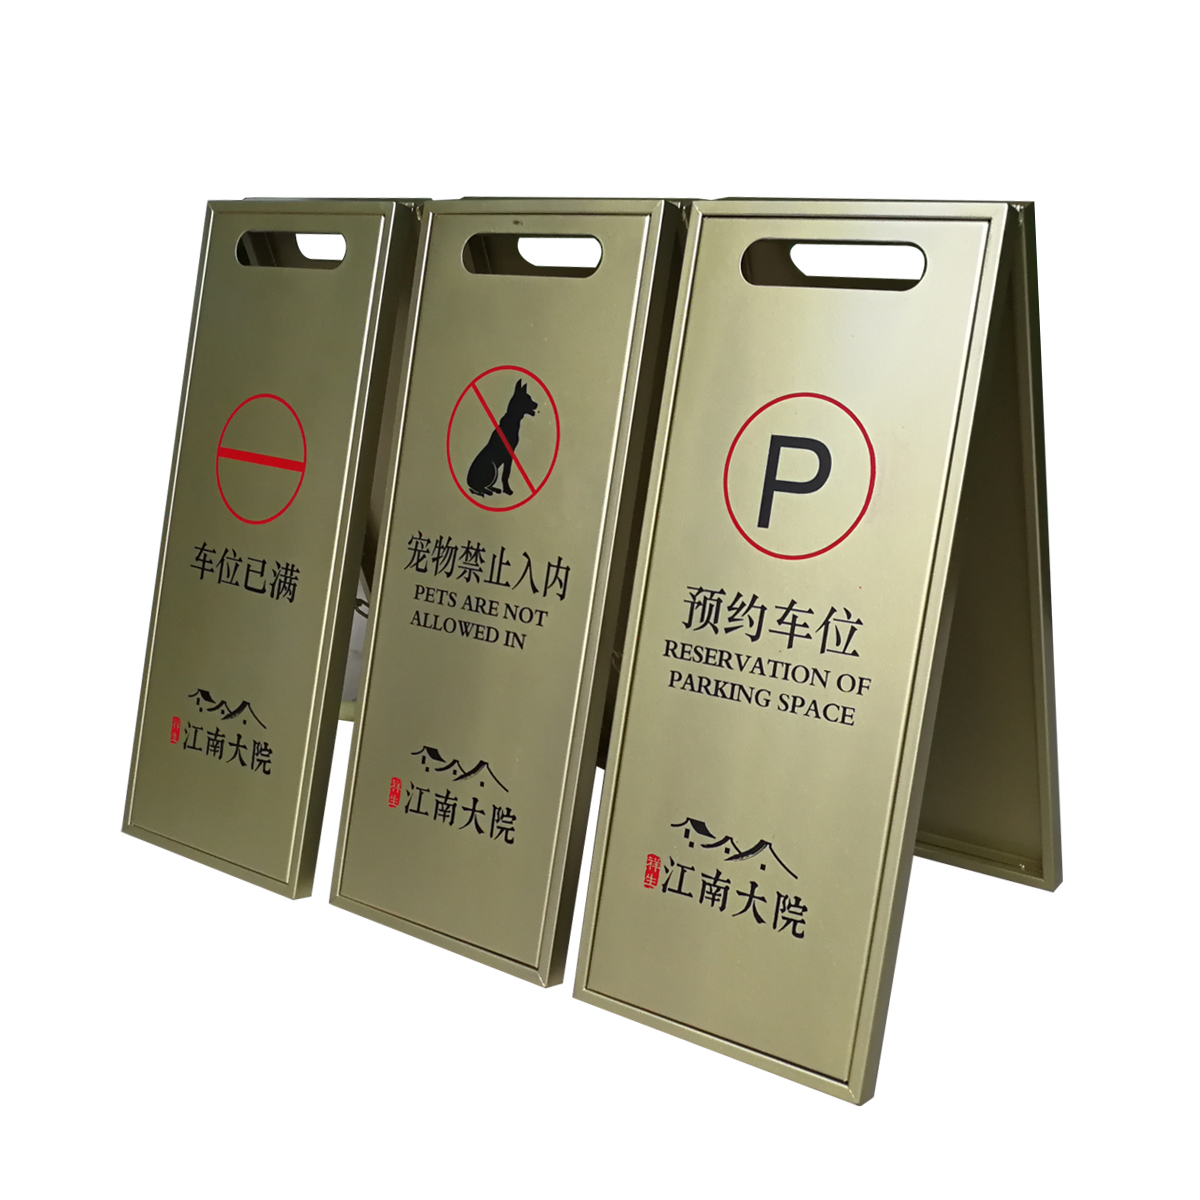 The new Yanhui stainless steel door prohibits warning signs do not park signs signs signs parking signs parking piles